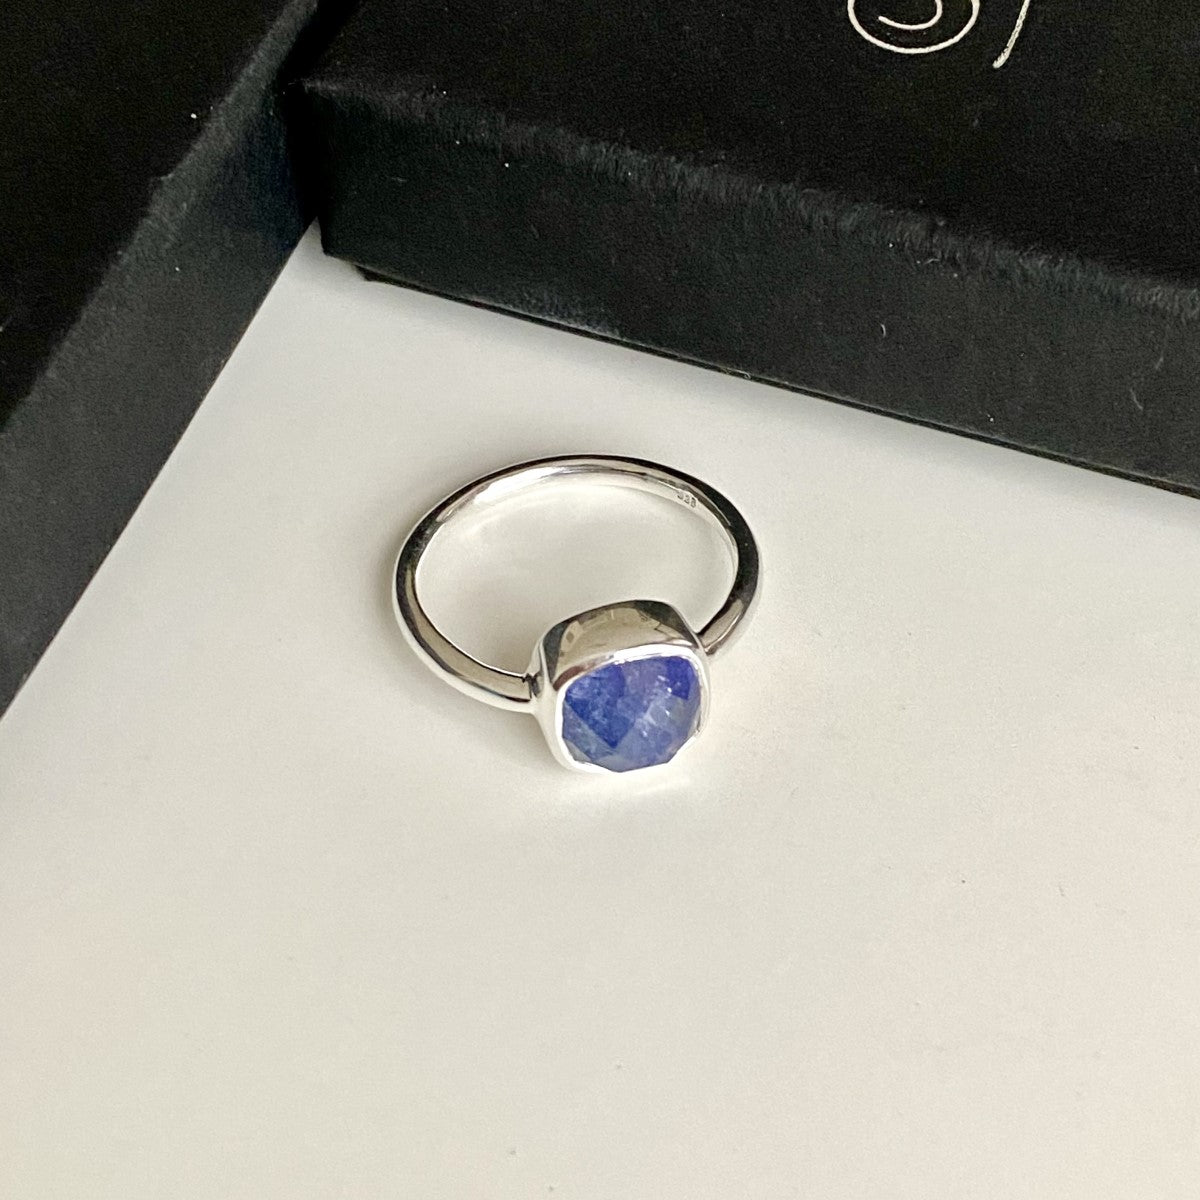 Faceted Square Cut Natural Gemstone Sterling Silver Solitaire Ring - Tanzanite